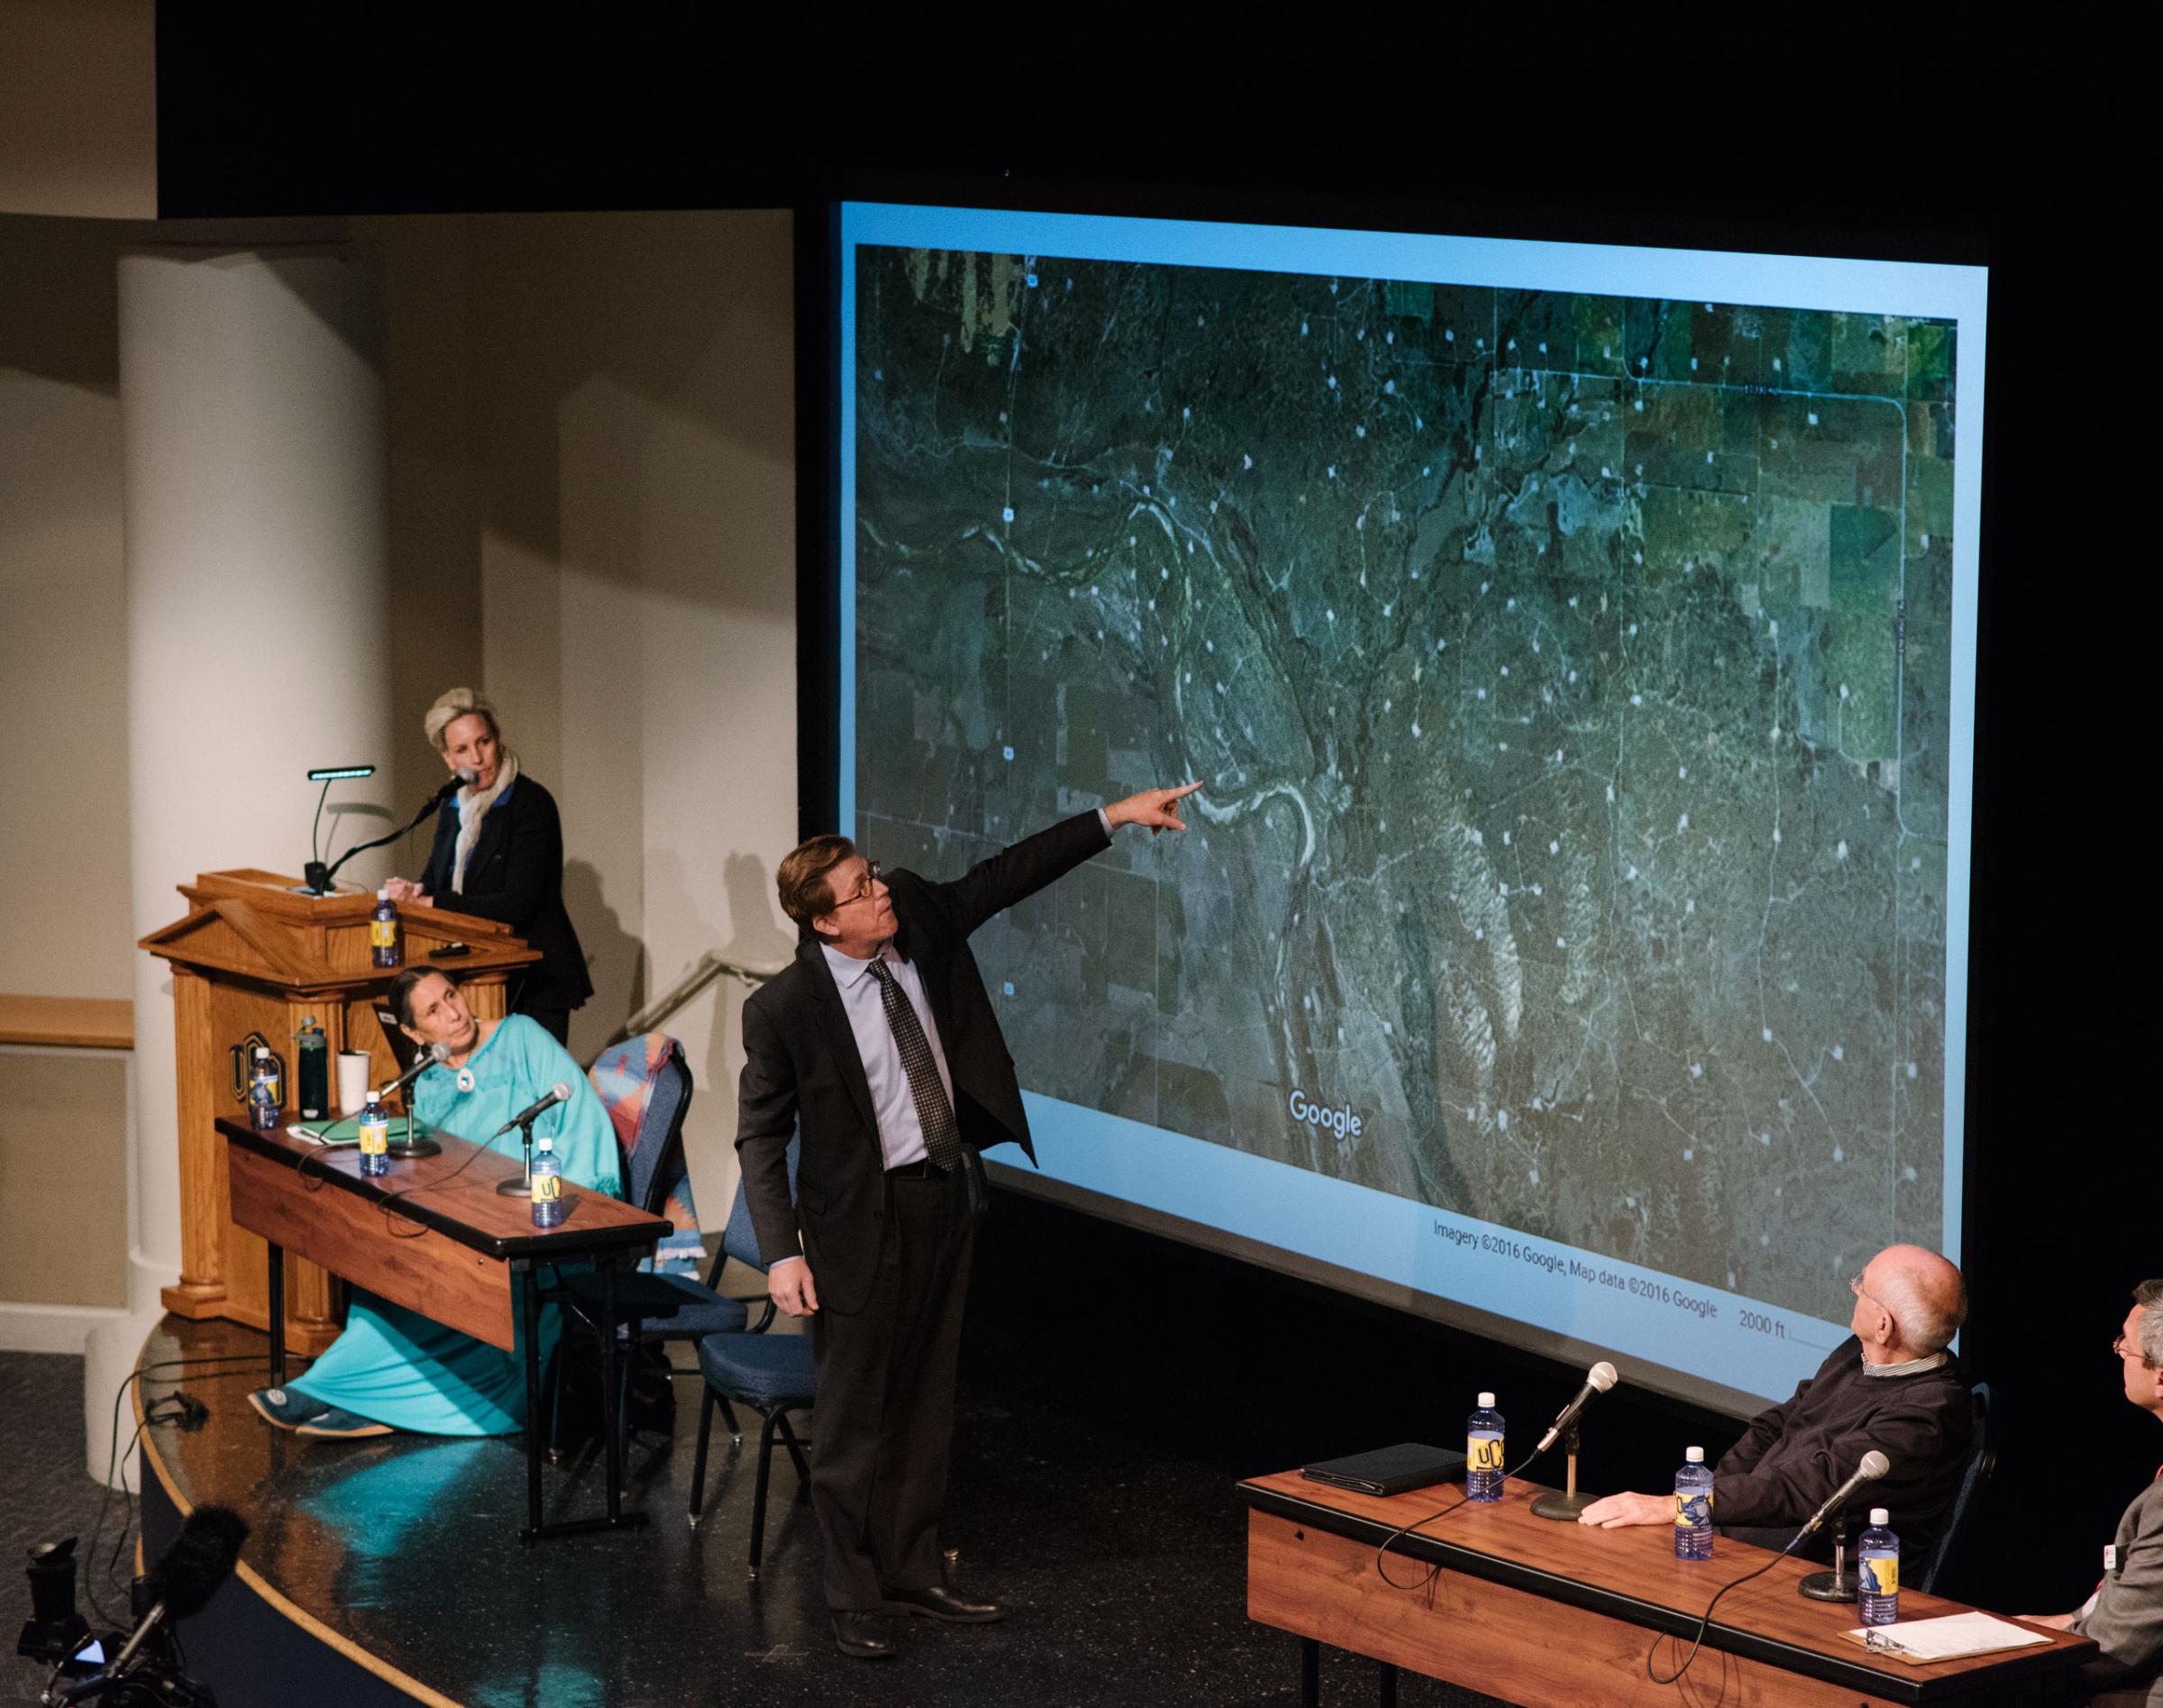 Johnson Bridgewater from the Sierra Club, points to areas affected by earthquakes at a public forum event hosted by Erin Brockovich and attended by notable public figures such as Casey Camp-Horinek from the Ponca Nation. Edmond, OK